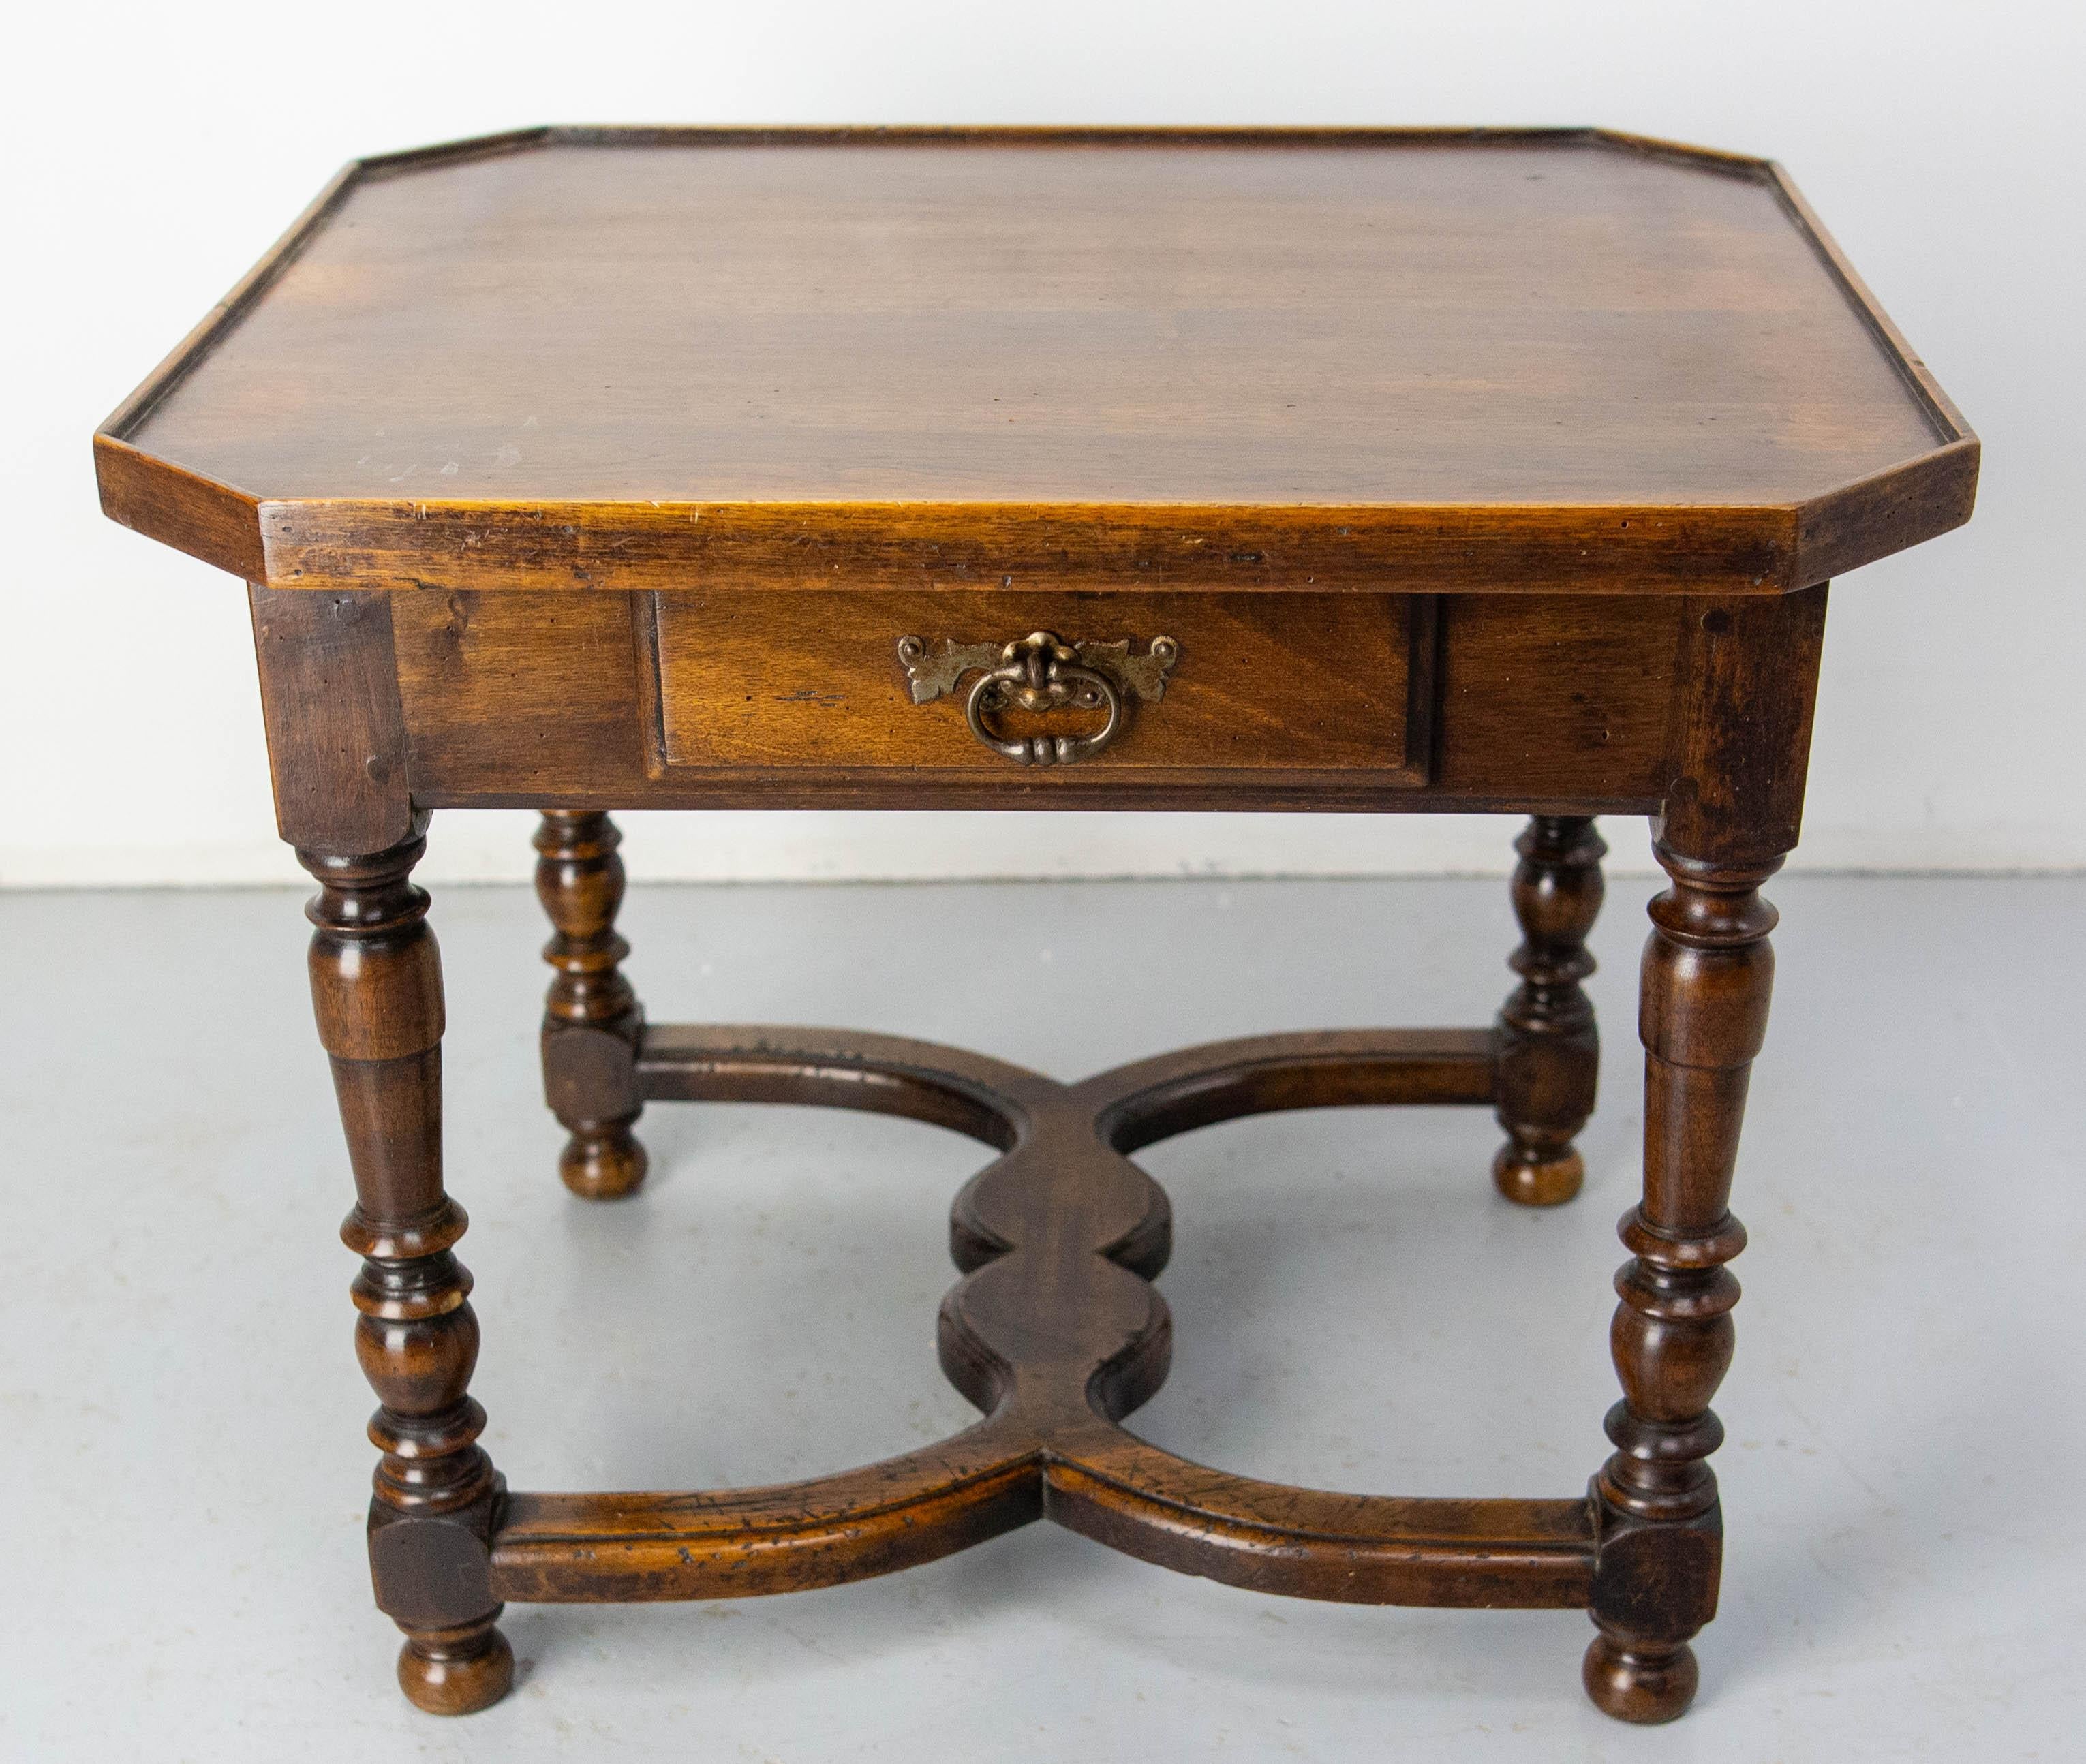 French walnut coffee table or little end table made circa 1940.
Full of character
Good condition with marks of use (please see photos)

Shipping:
57 / 63 / 53 kg 11 kg